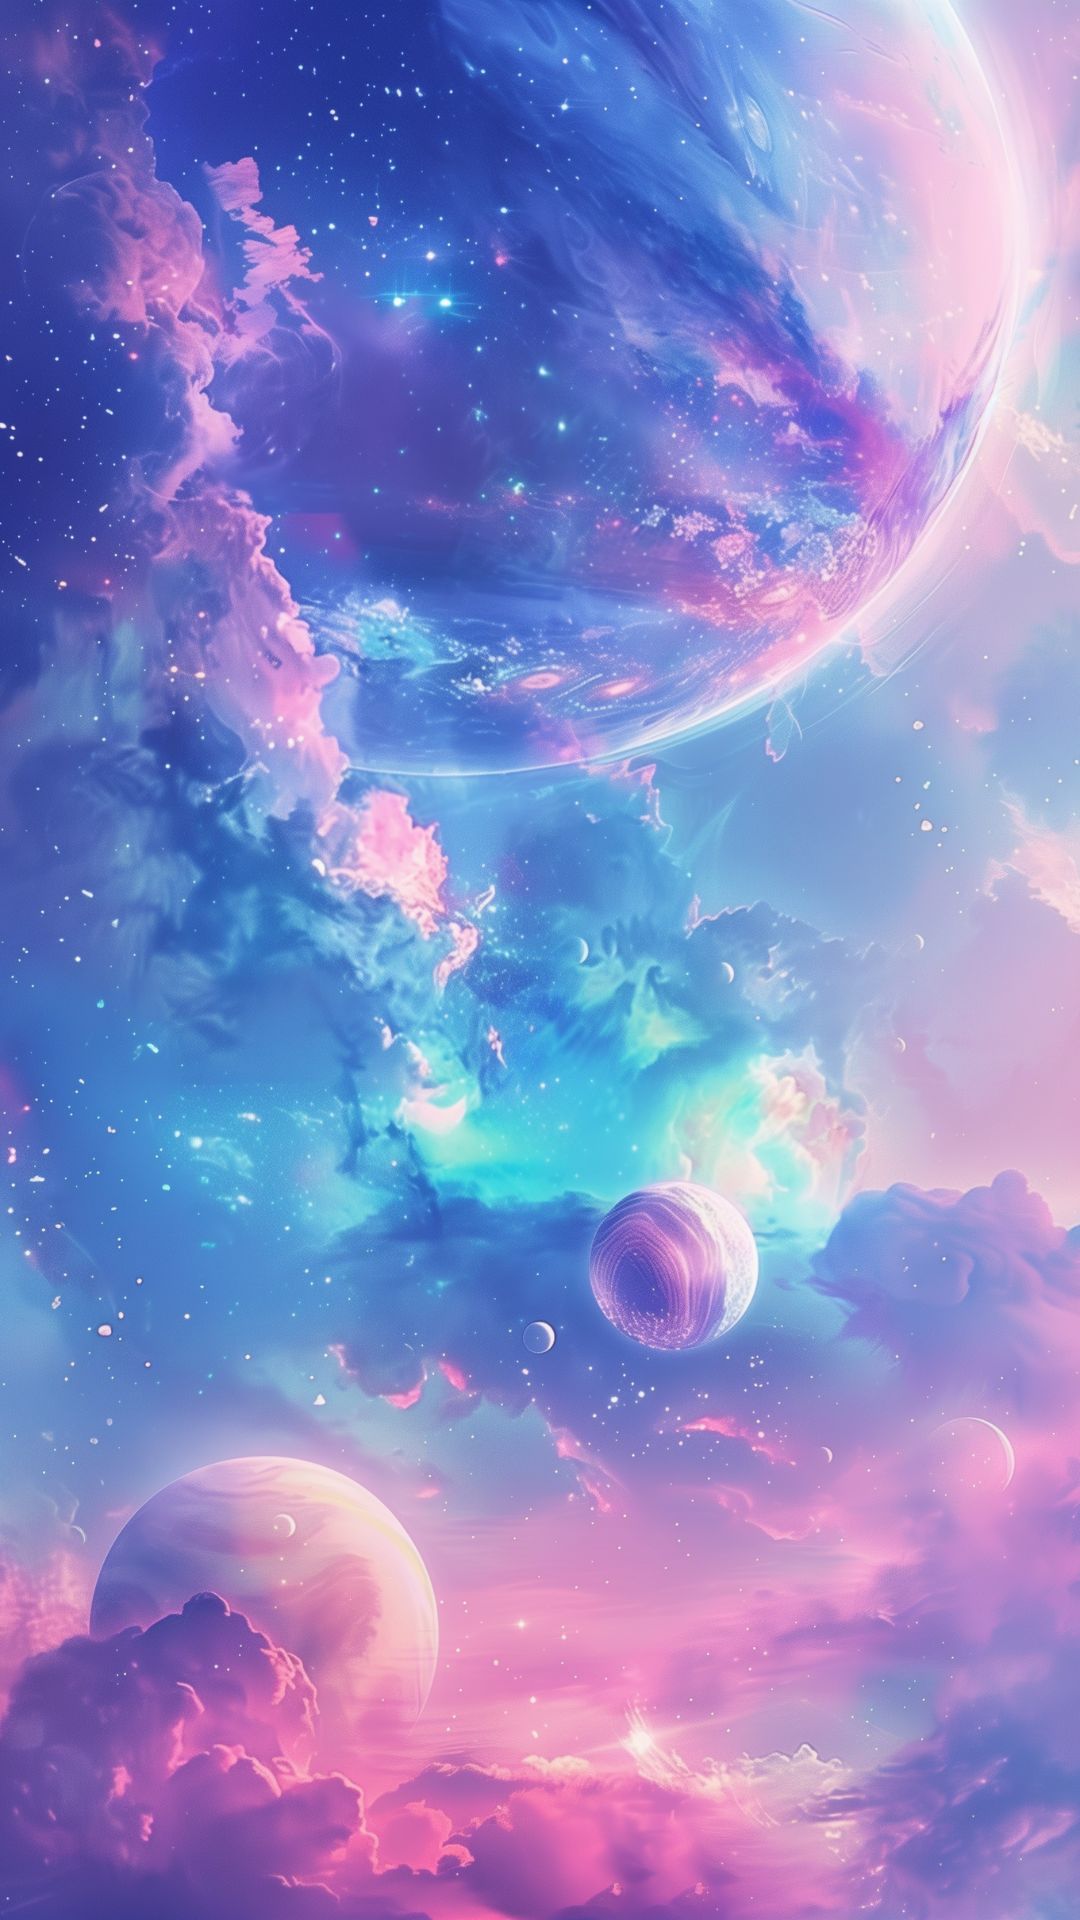 23 Cosmic Galaxy Nebula iPhone Wallpapers and free Midjourney Prompts